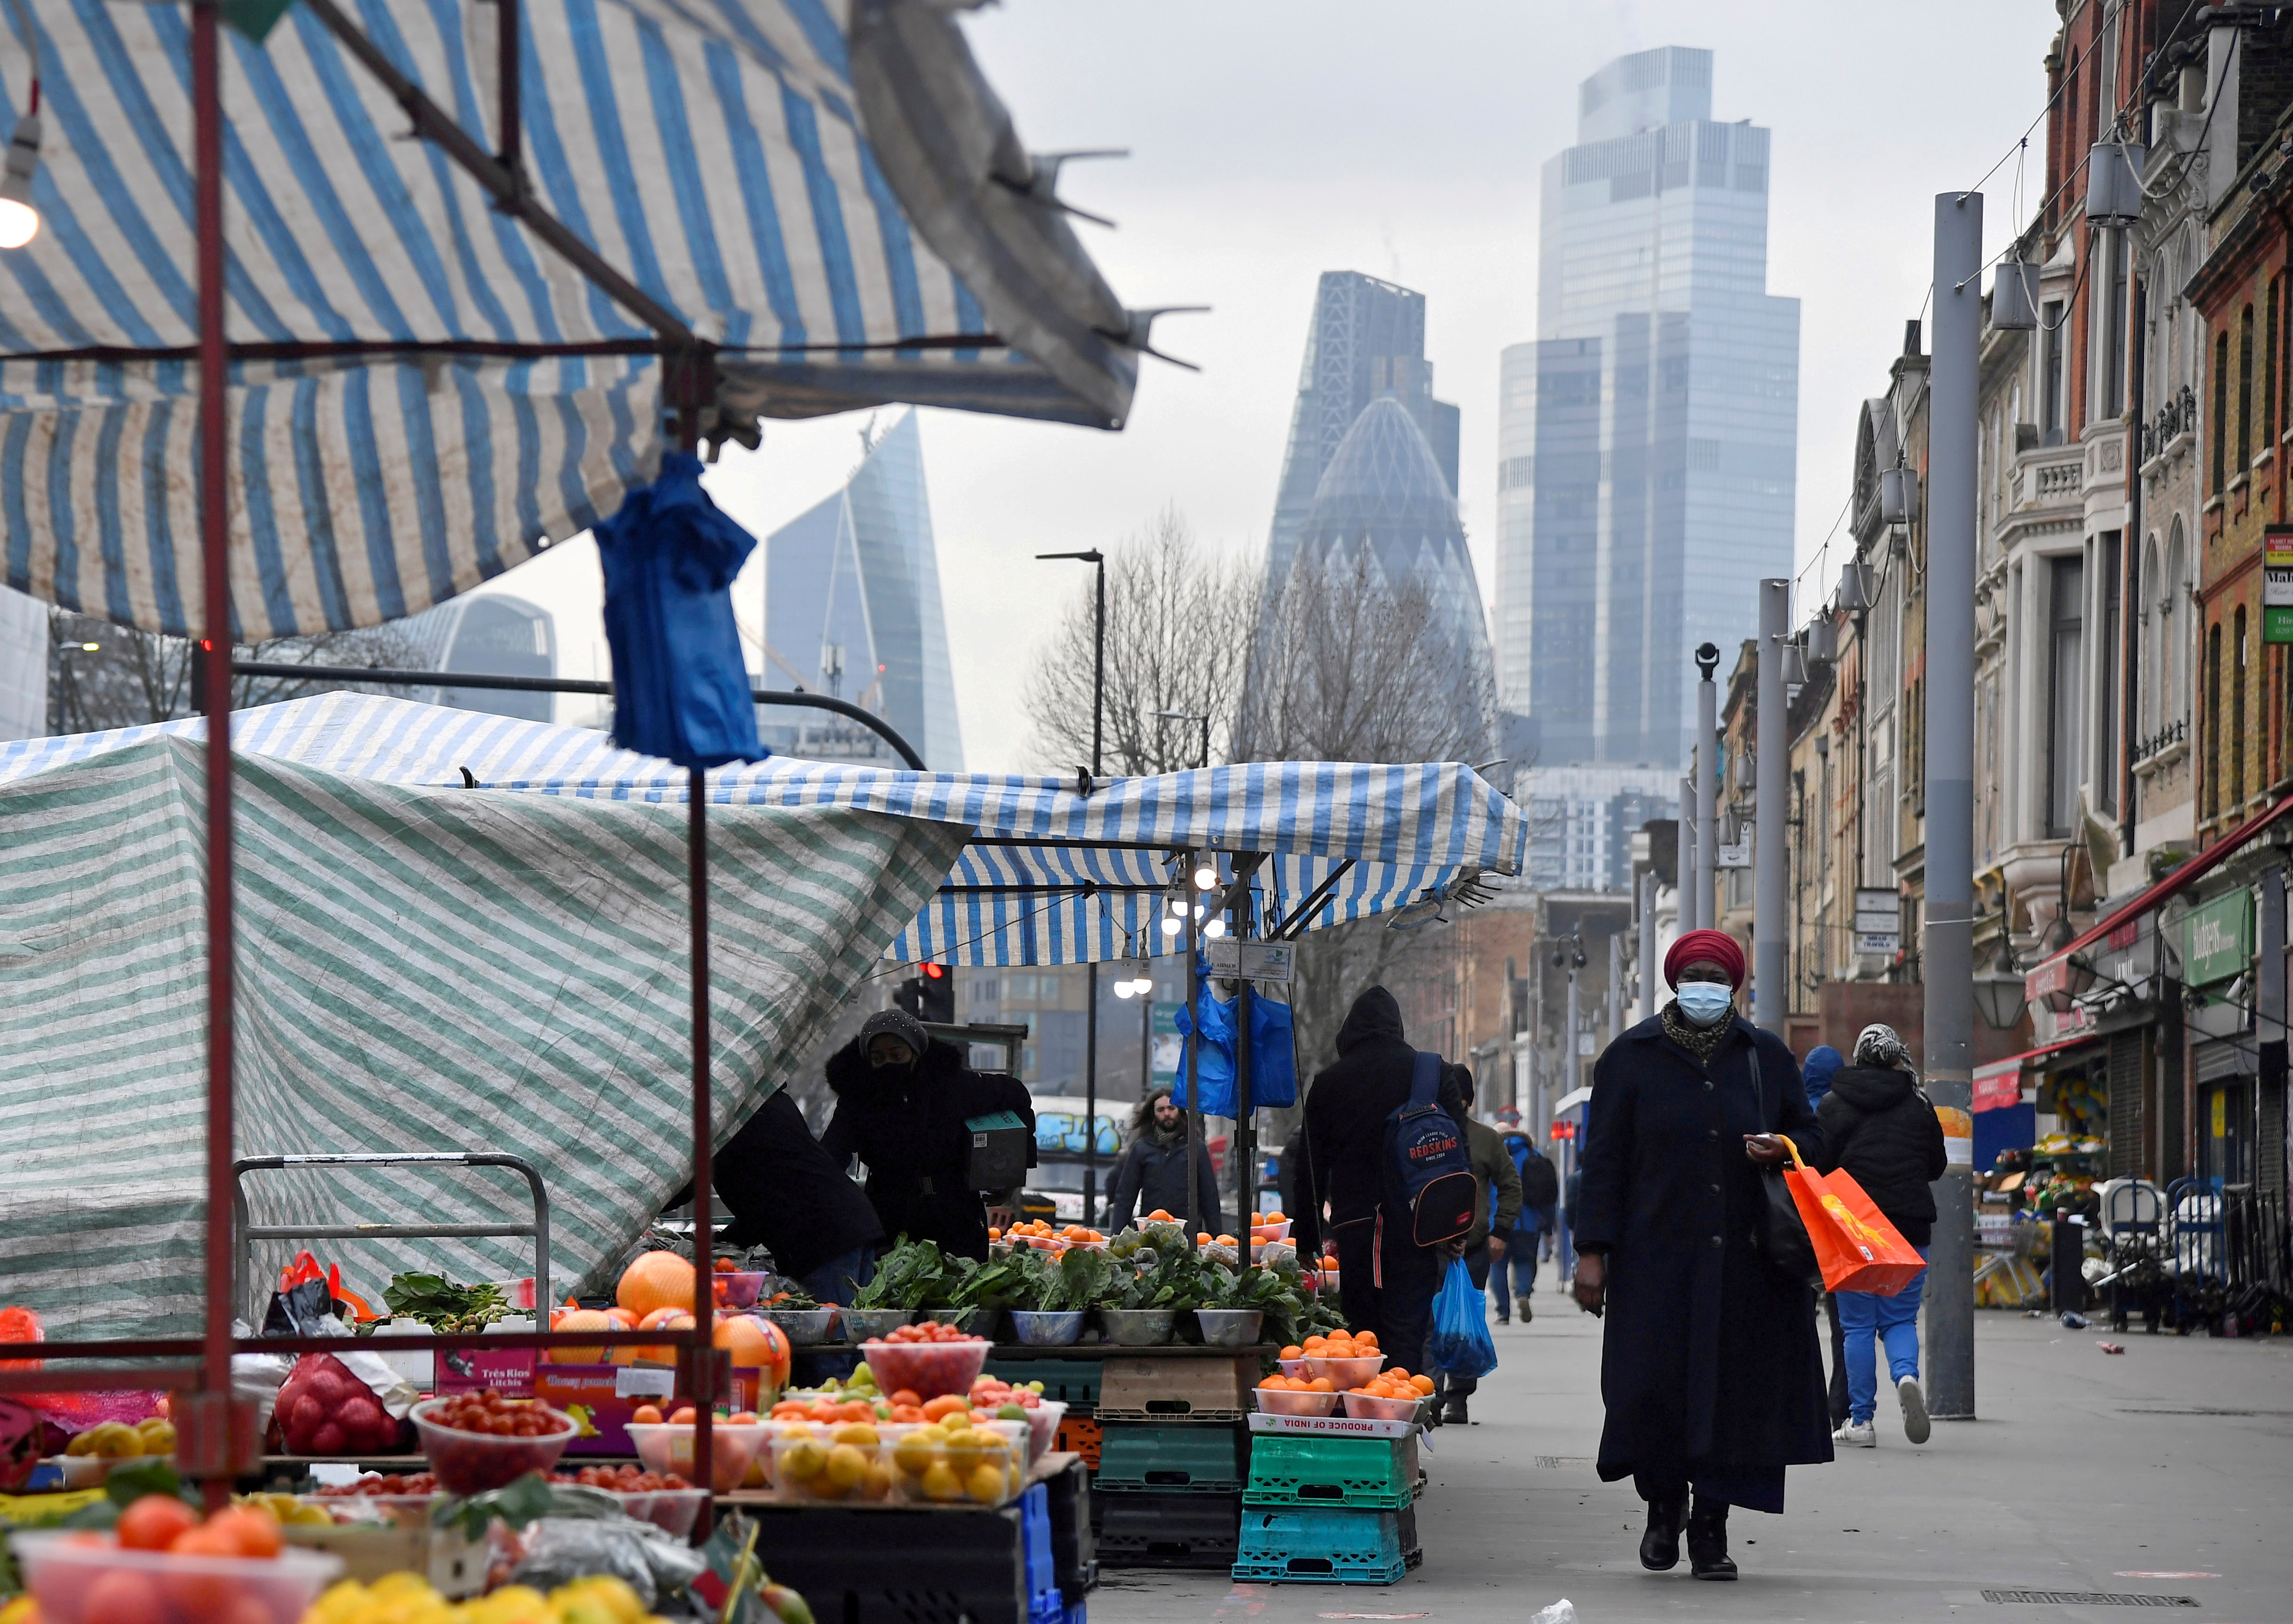 People shop at market stalls, with skyscrapers of the CIty of London financial district seen behind, amid the coronavirus disease (COVID-19) pandemic, in London, Britain, January 15, 2021. REUTERS/Toby Melville